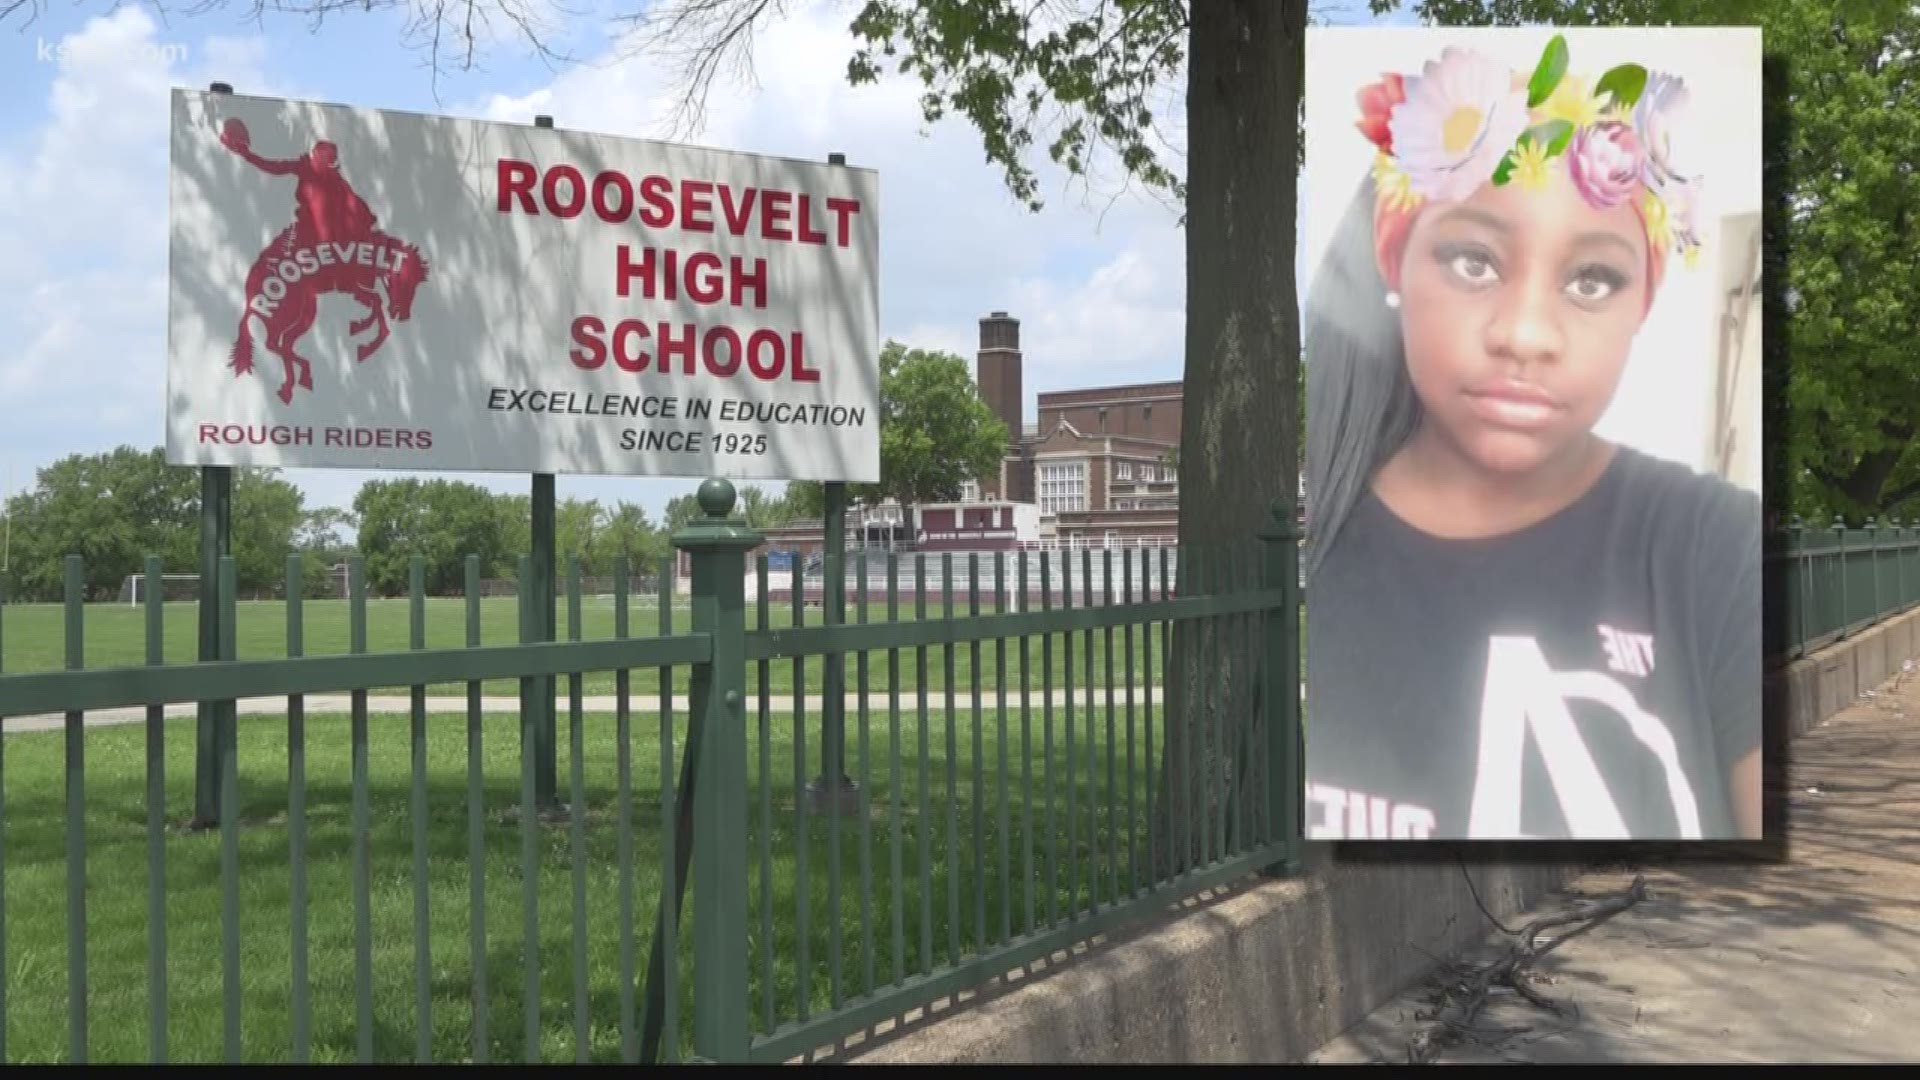 Police found 16-year-old Kristina Curry dead on the rear parking lot at Roosevelt high school, where she attended school. They said she had been shot several times.